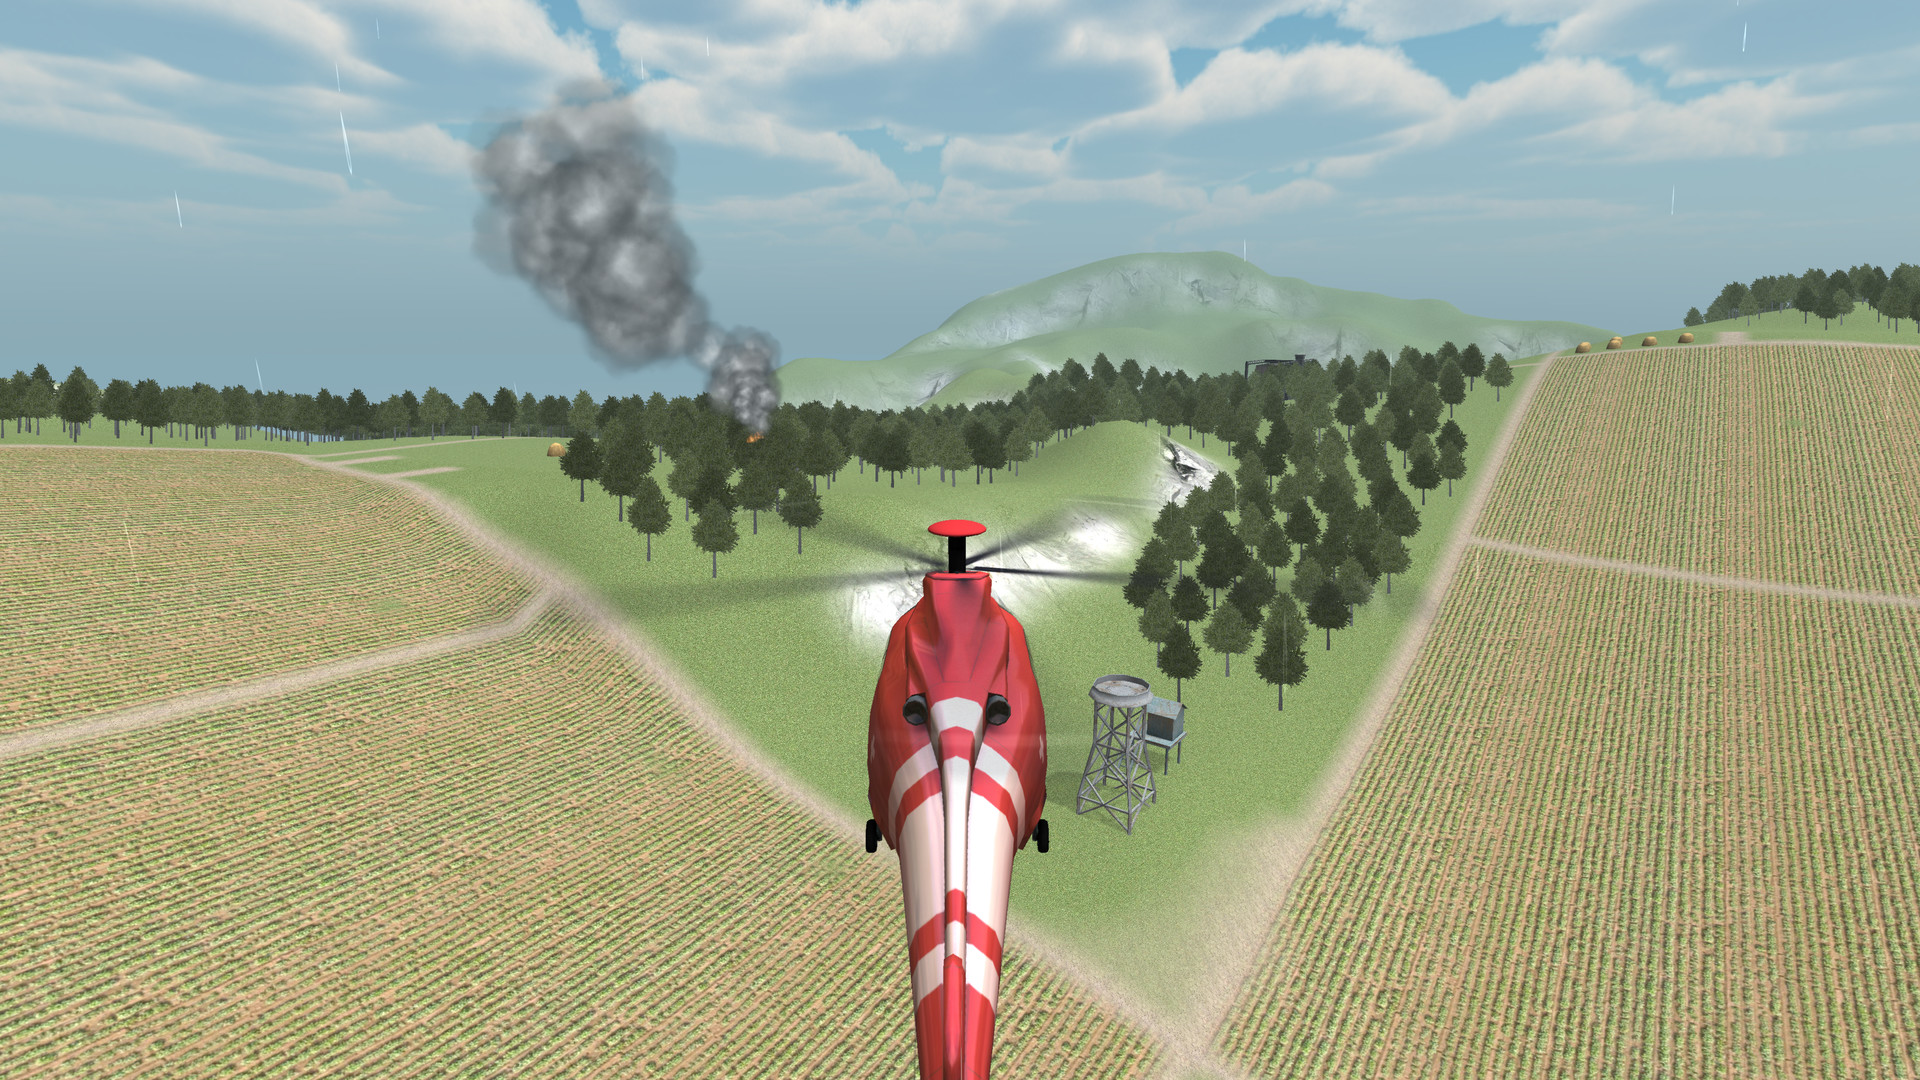 free helicopter sim games